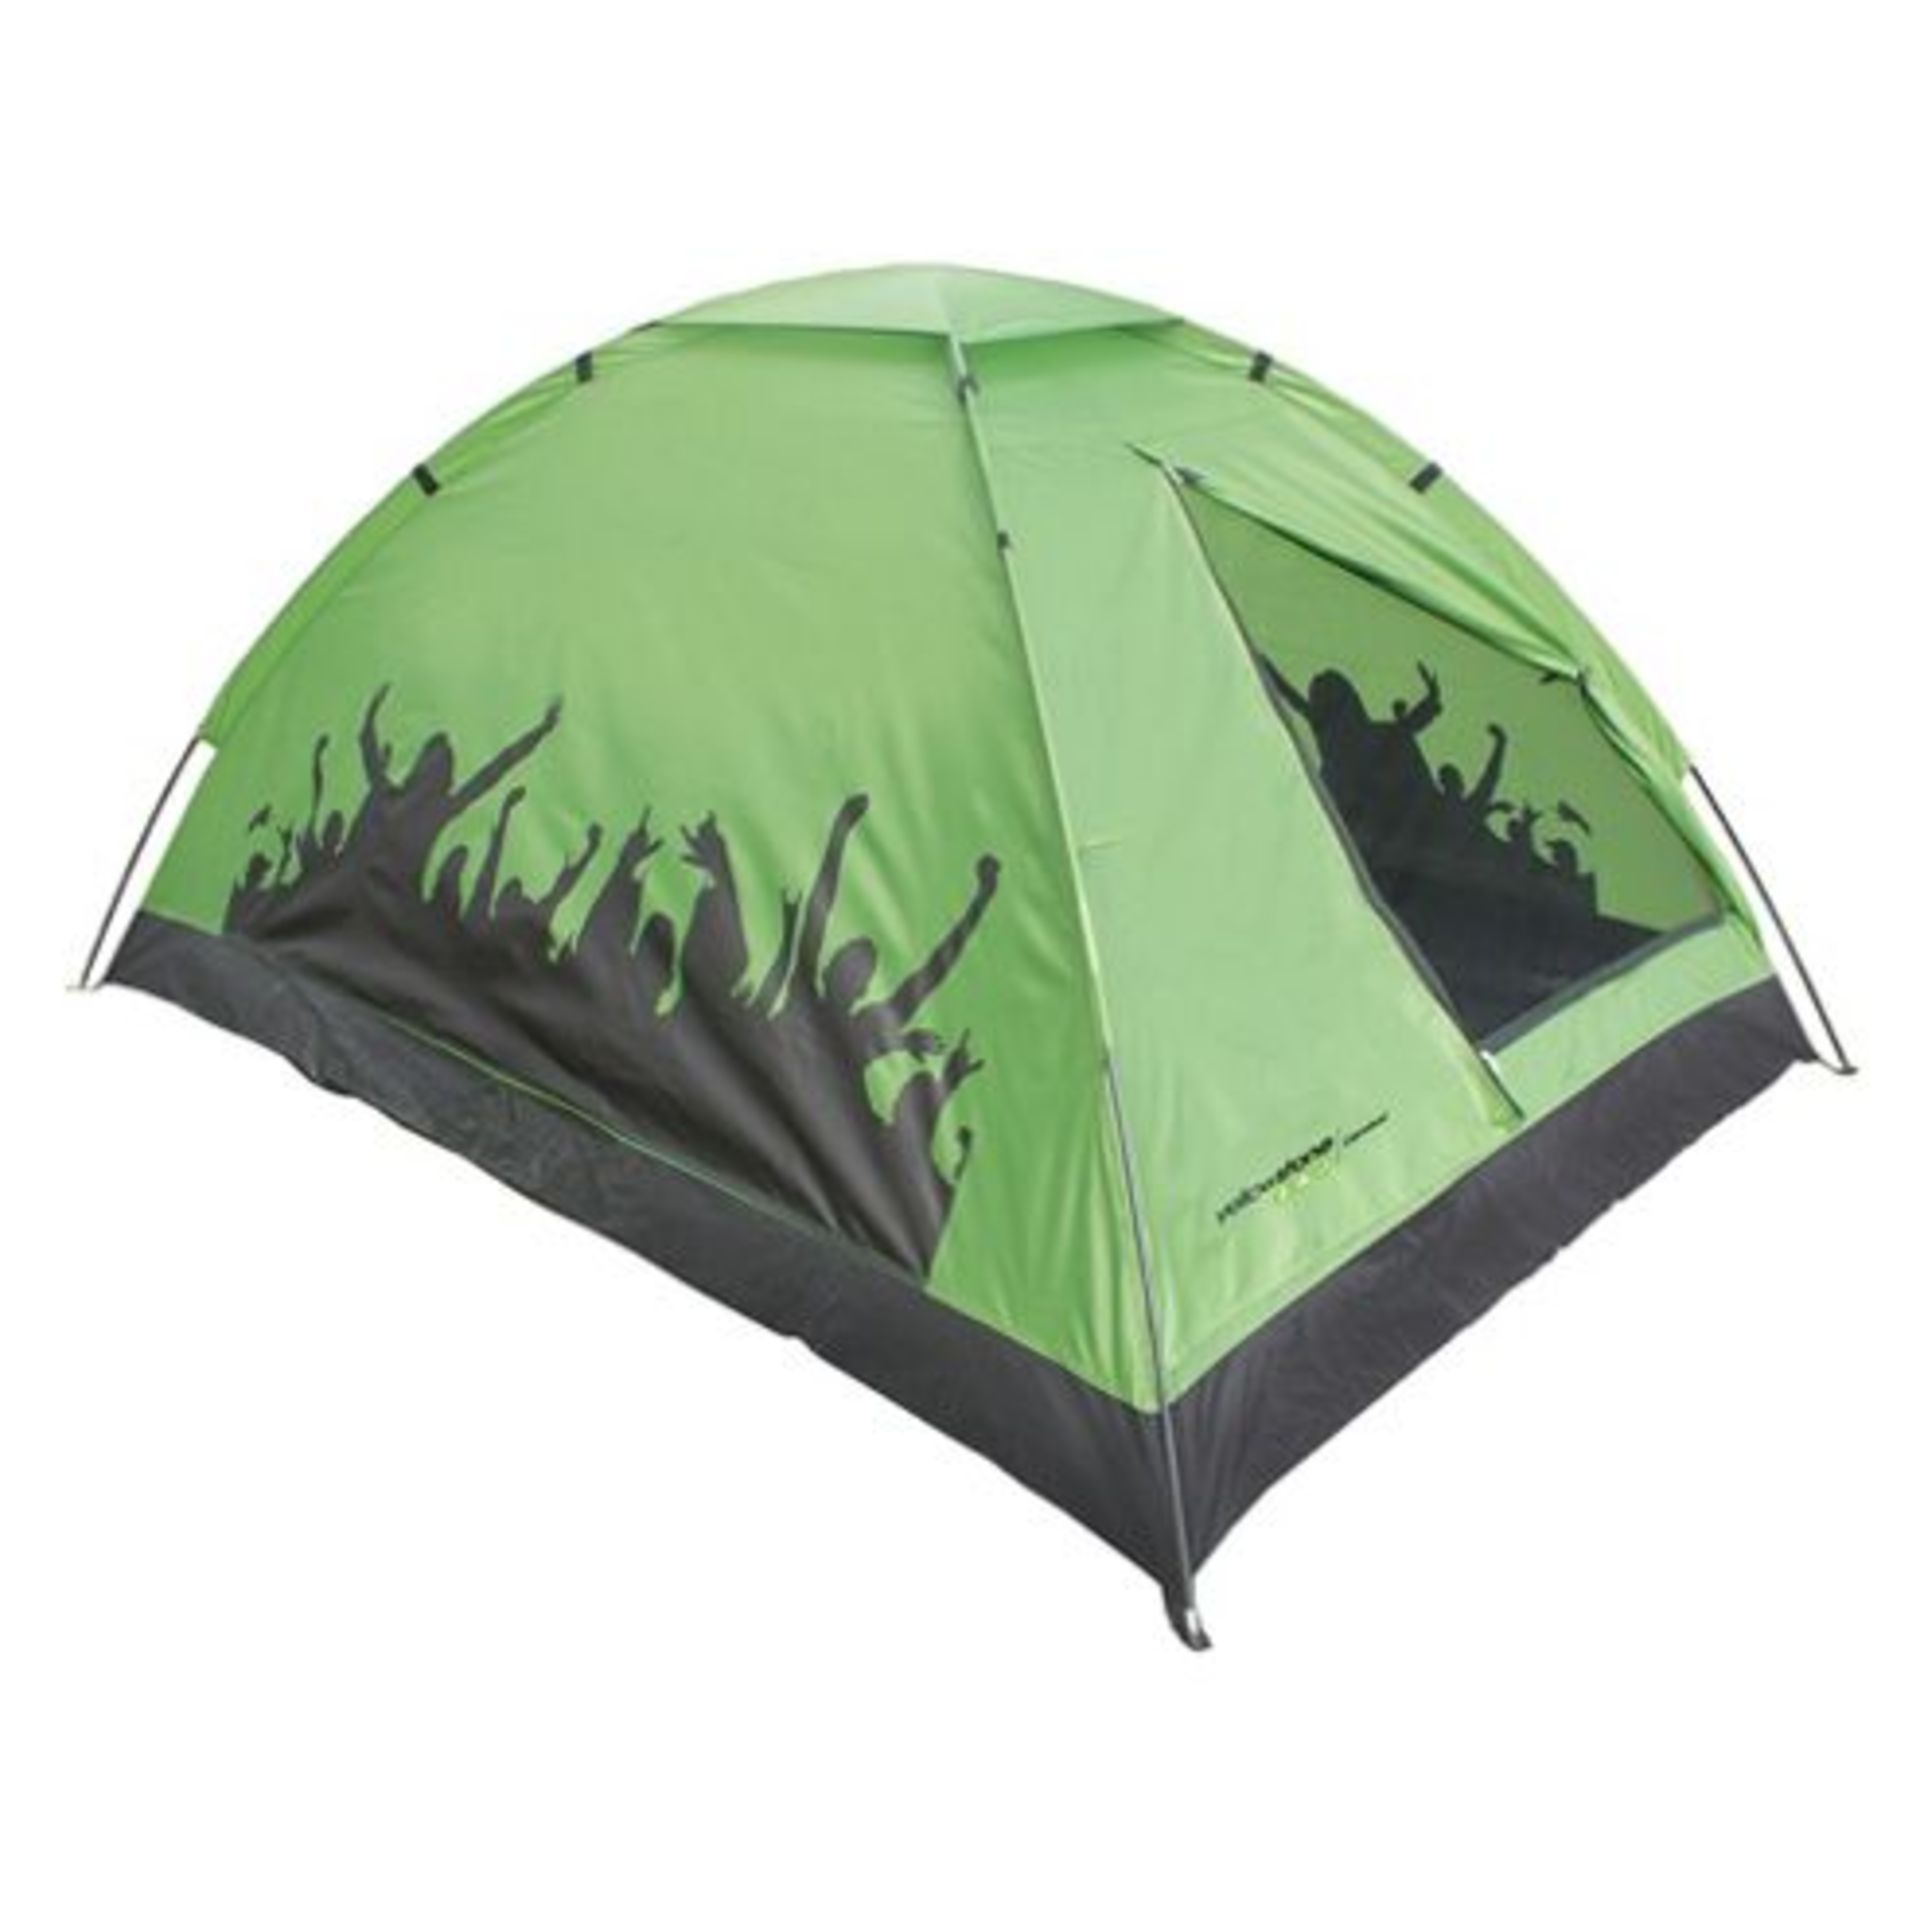 V Brand New Two Person Silhouette Dome Tent X 2 YOUR BID PRICE TO BE MULTIPLIED BY TWO